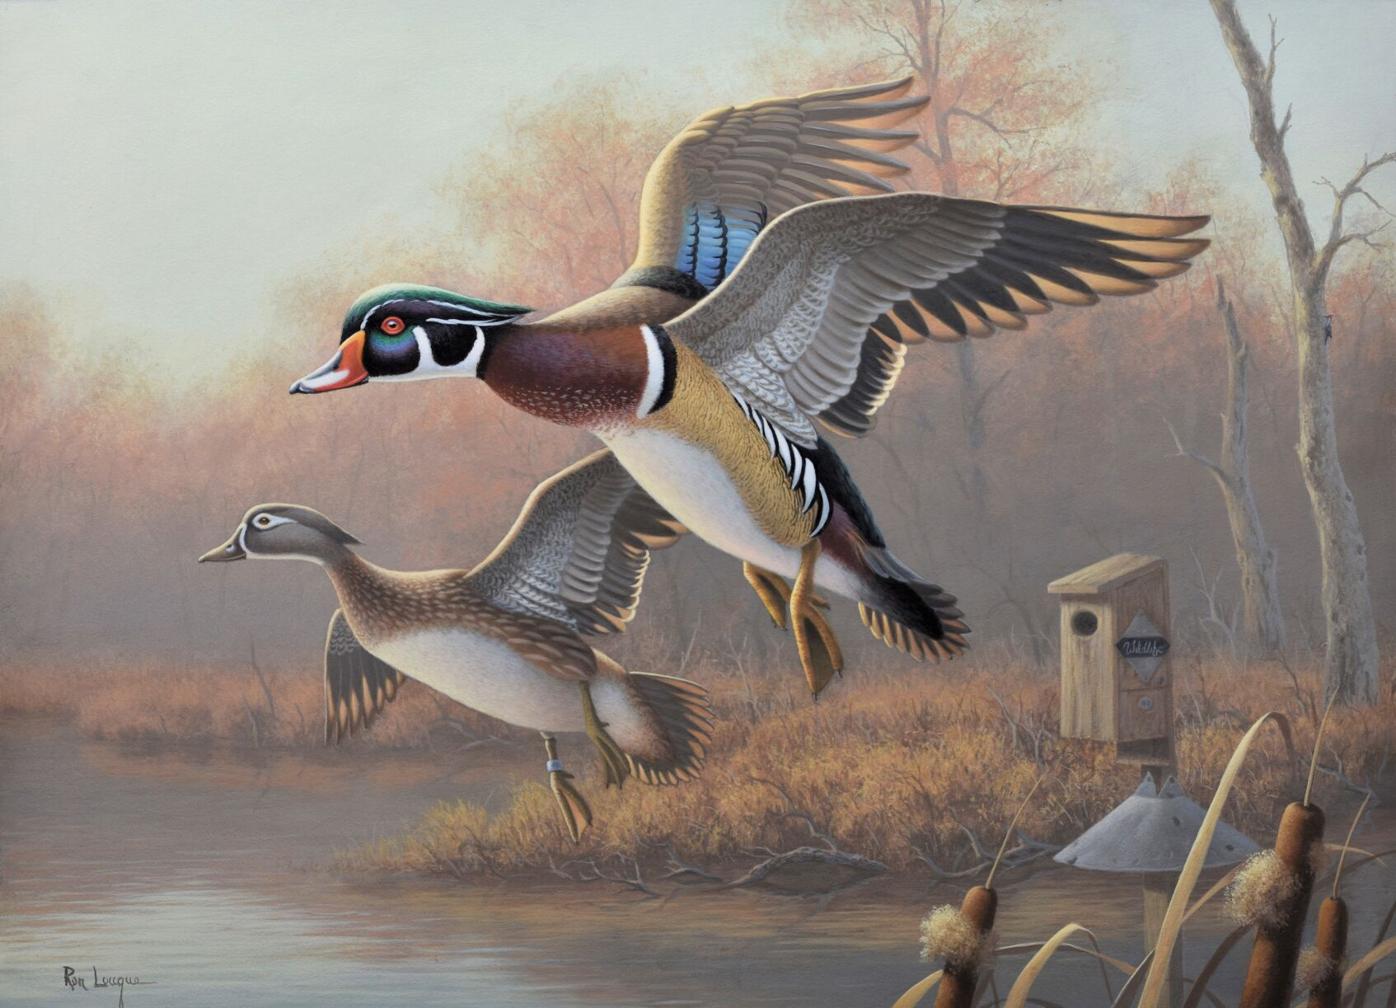 Final Edition Of The North Carolina Waterfowl Print And Stamp On Sale Now News Ashepostandtimes Com